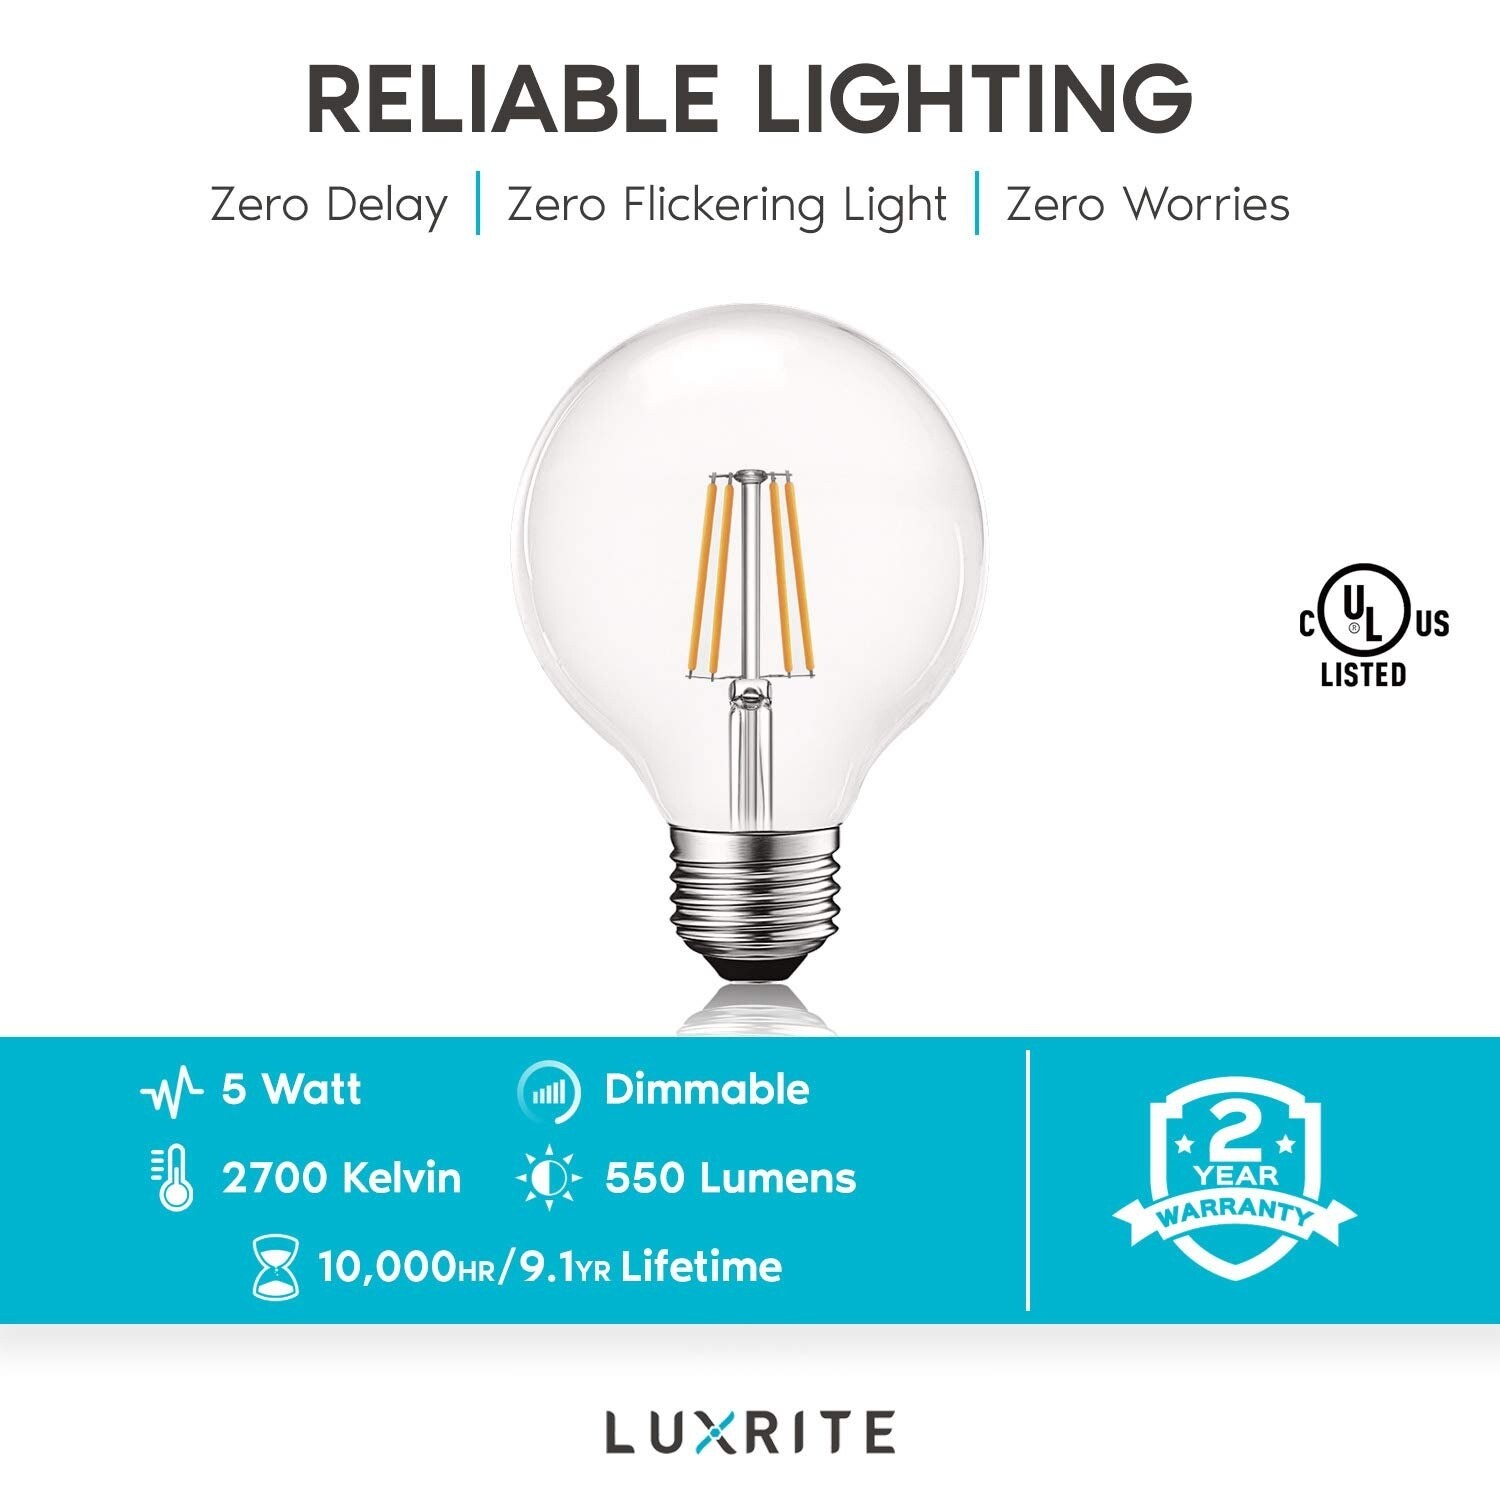 Luxrite G25 LED Light 60W Equivalent, 550 Lumens, Dimmable, Clear Glass, E26 Standard Base (4 Pack) Bed Bath & Beyond - 28958663